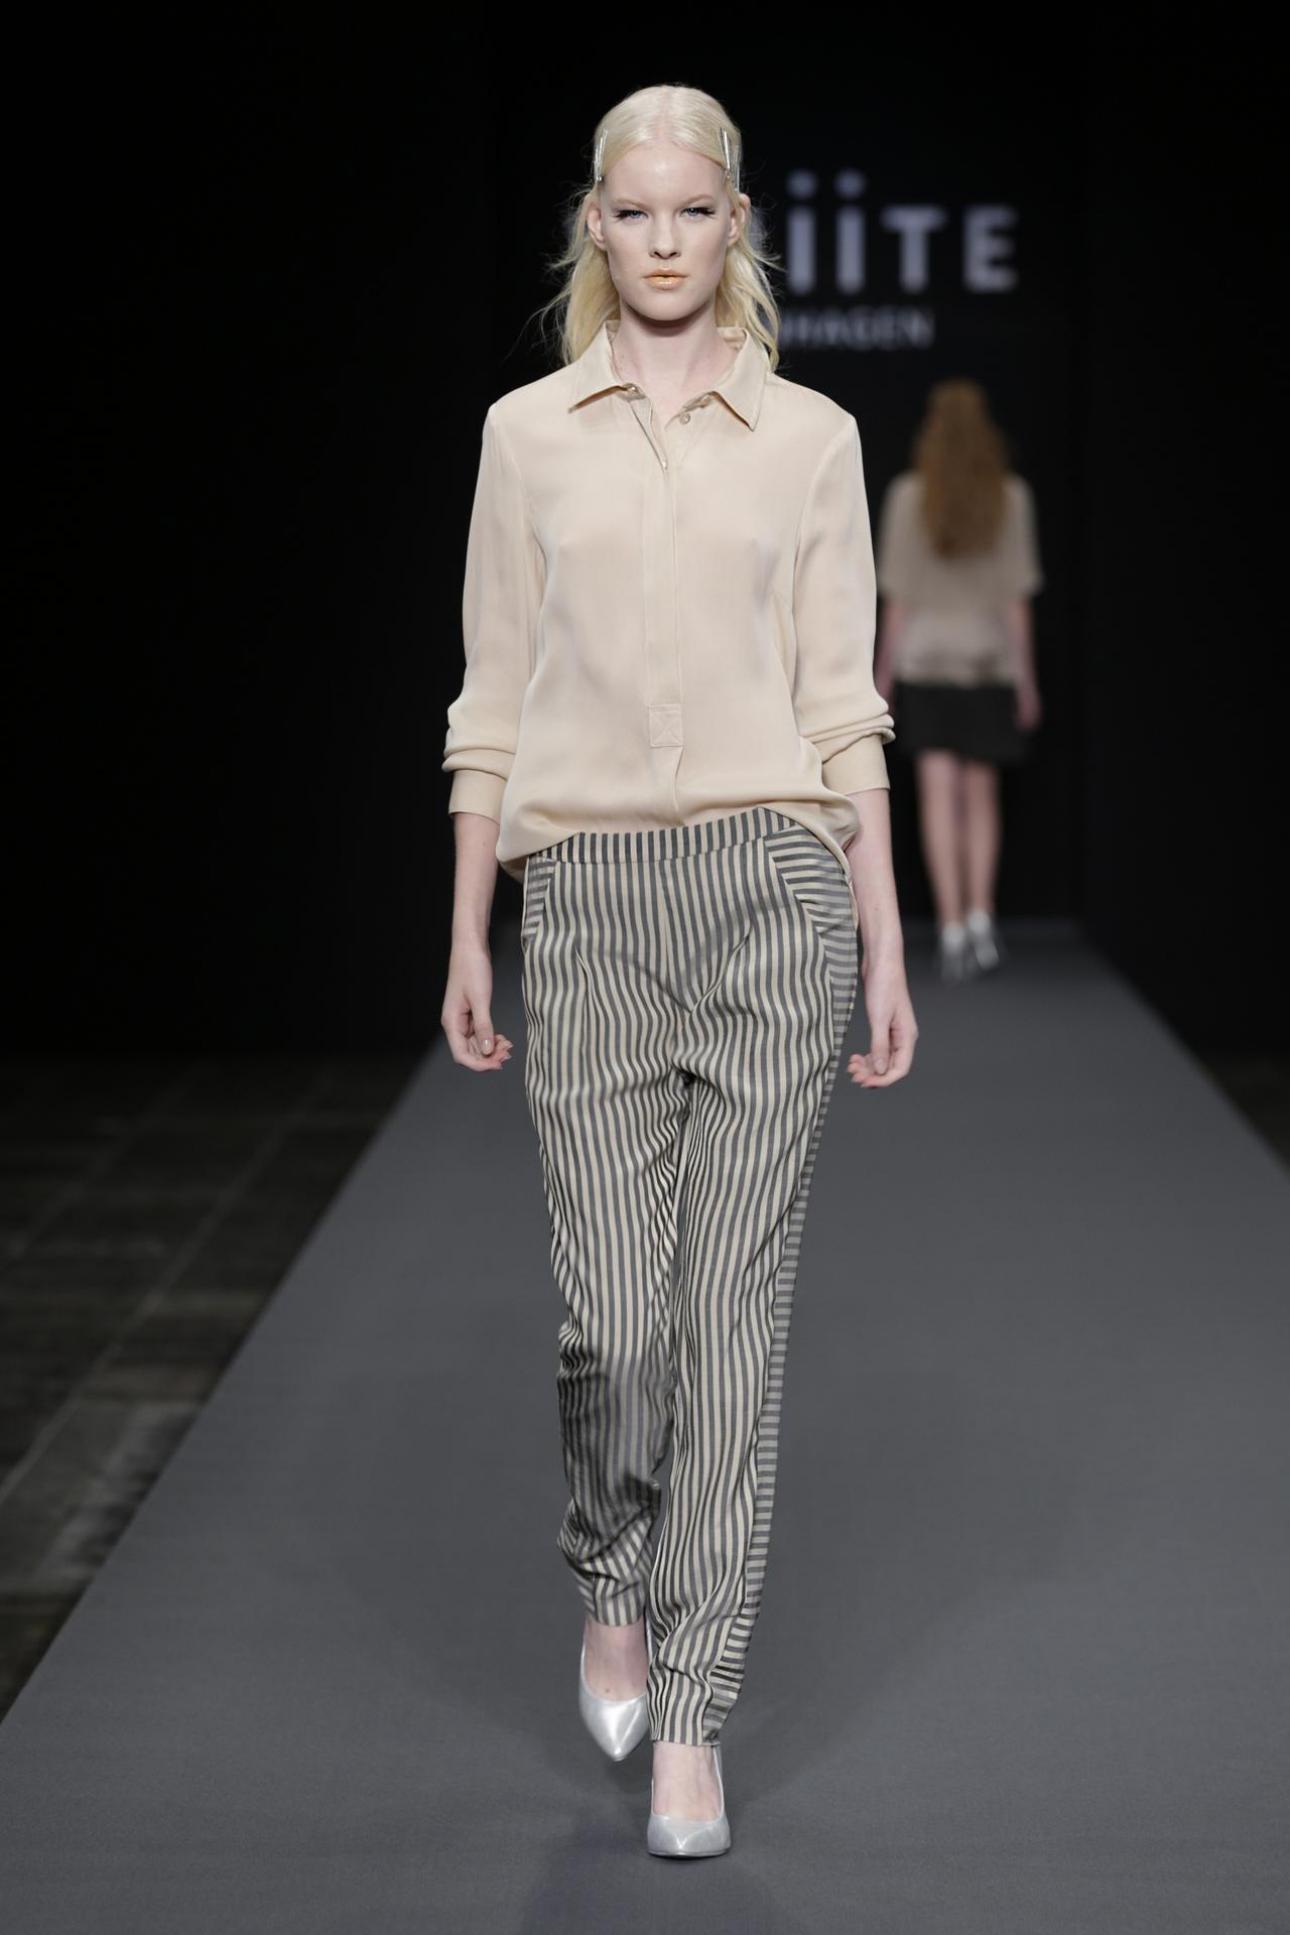 You are currently viewing Copenhagen Fashion Week: Whiite